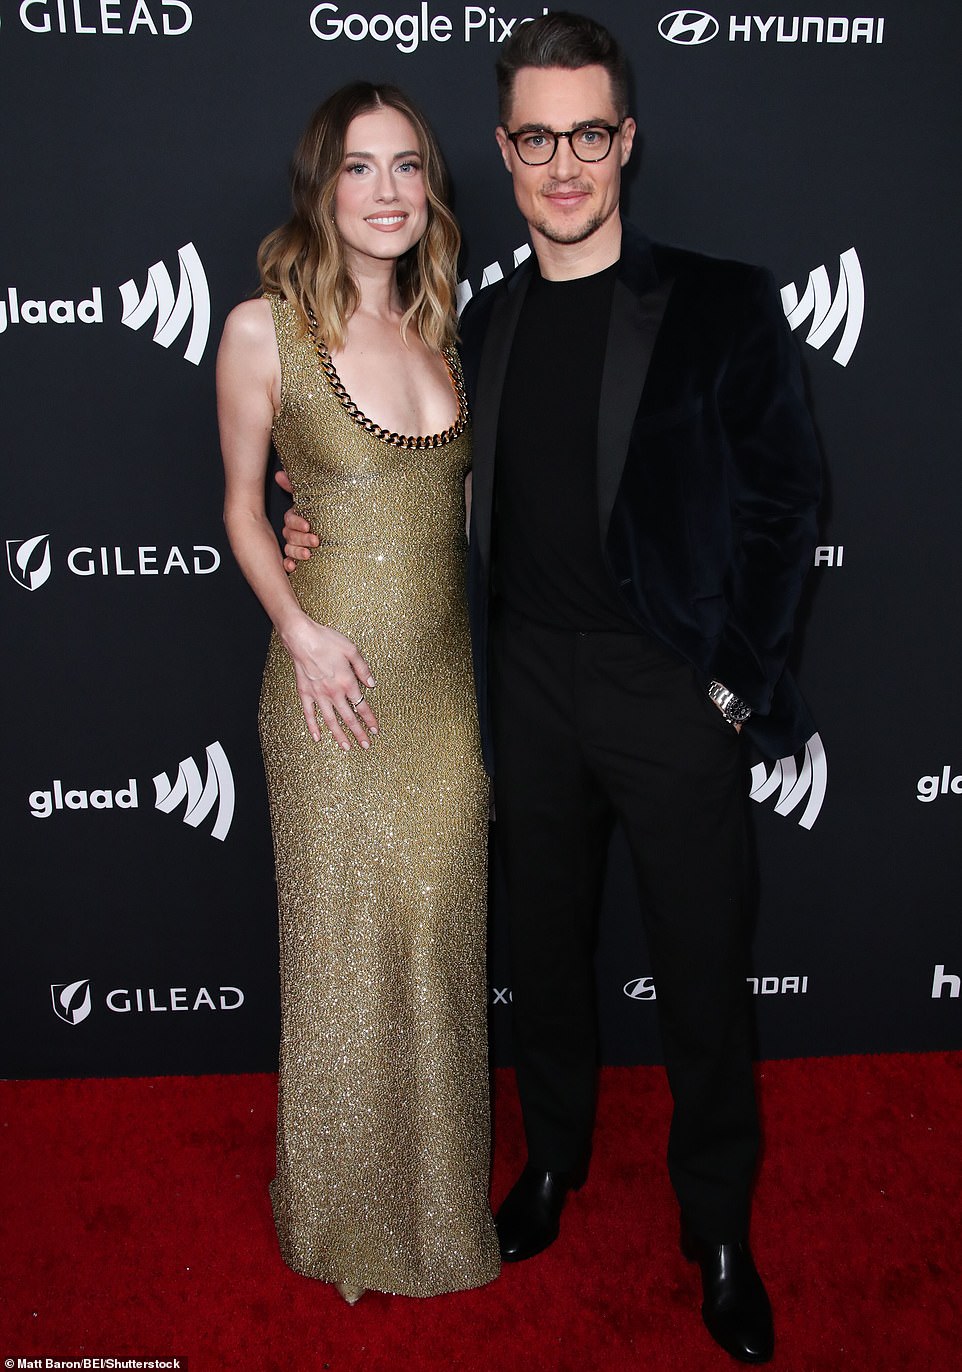 Get Out actress Allison Williams, who starred in the HBO sitcom Girls alongside Lena Dunham, draped her willowy frame in a sheer gold dress as she posed with her fiance Alexander Dreymon